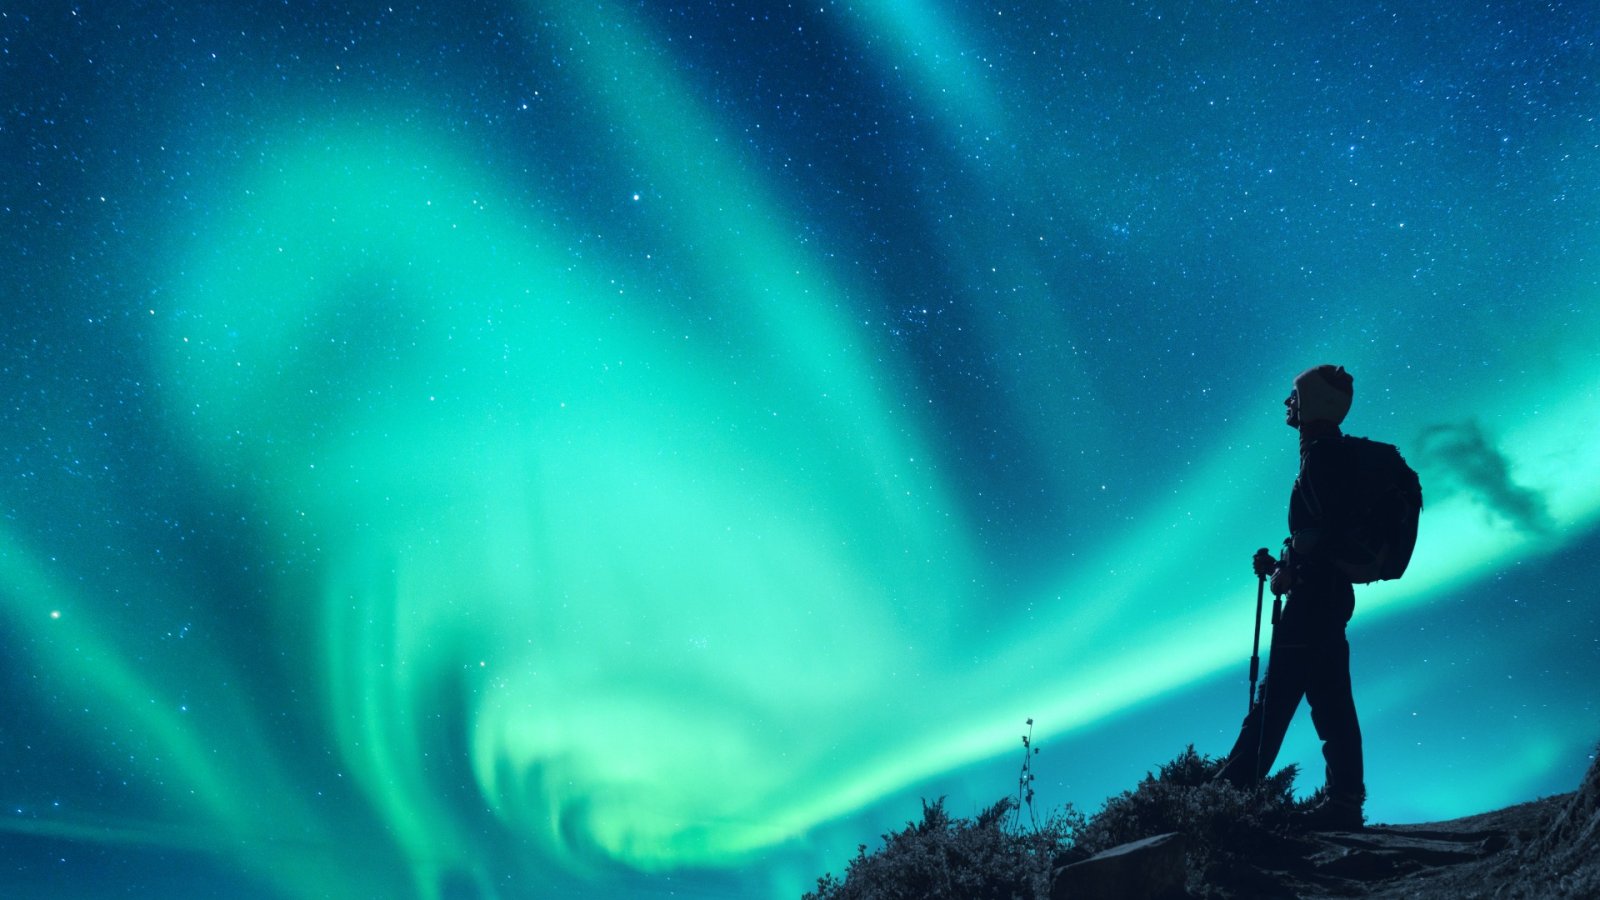 5 facts about seeing the Northern Lights